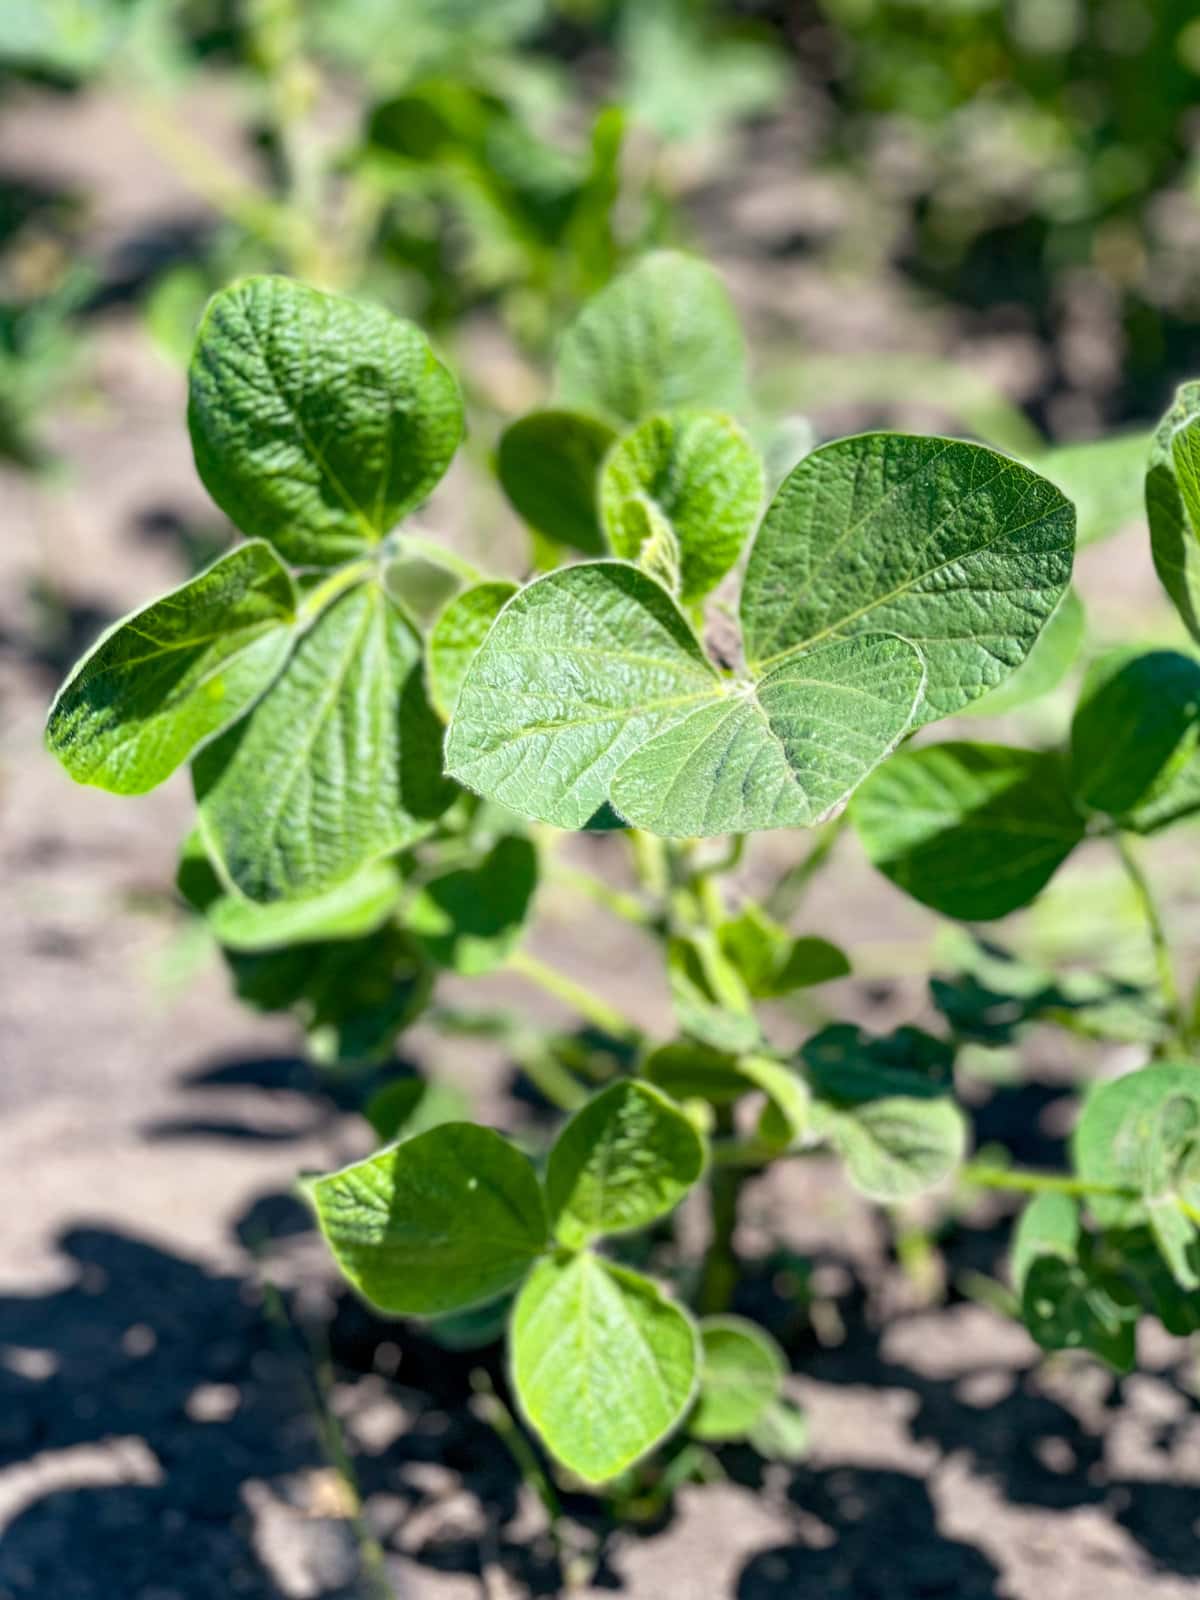 Green soybean plant in the ground.